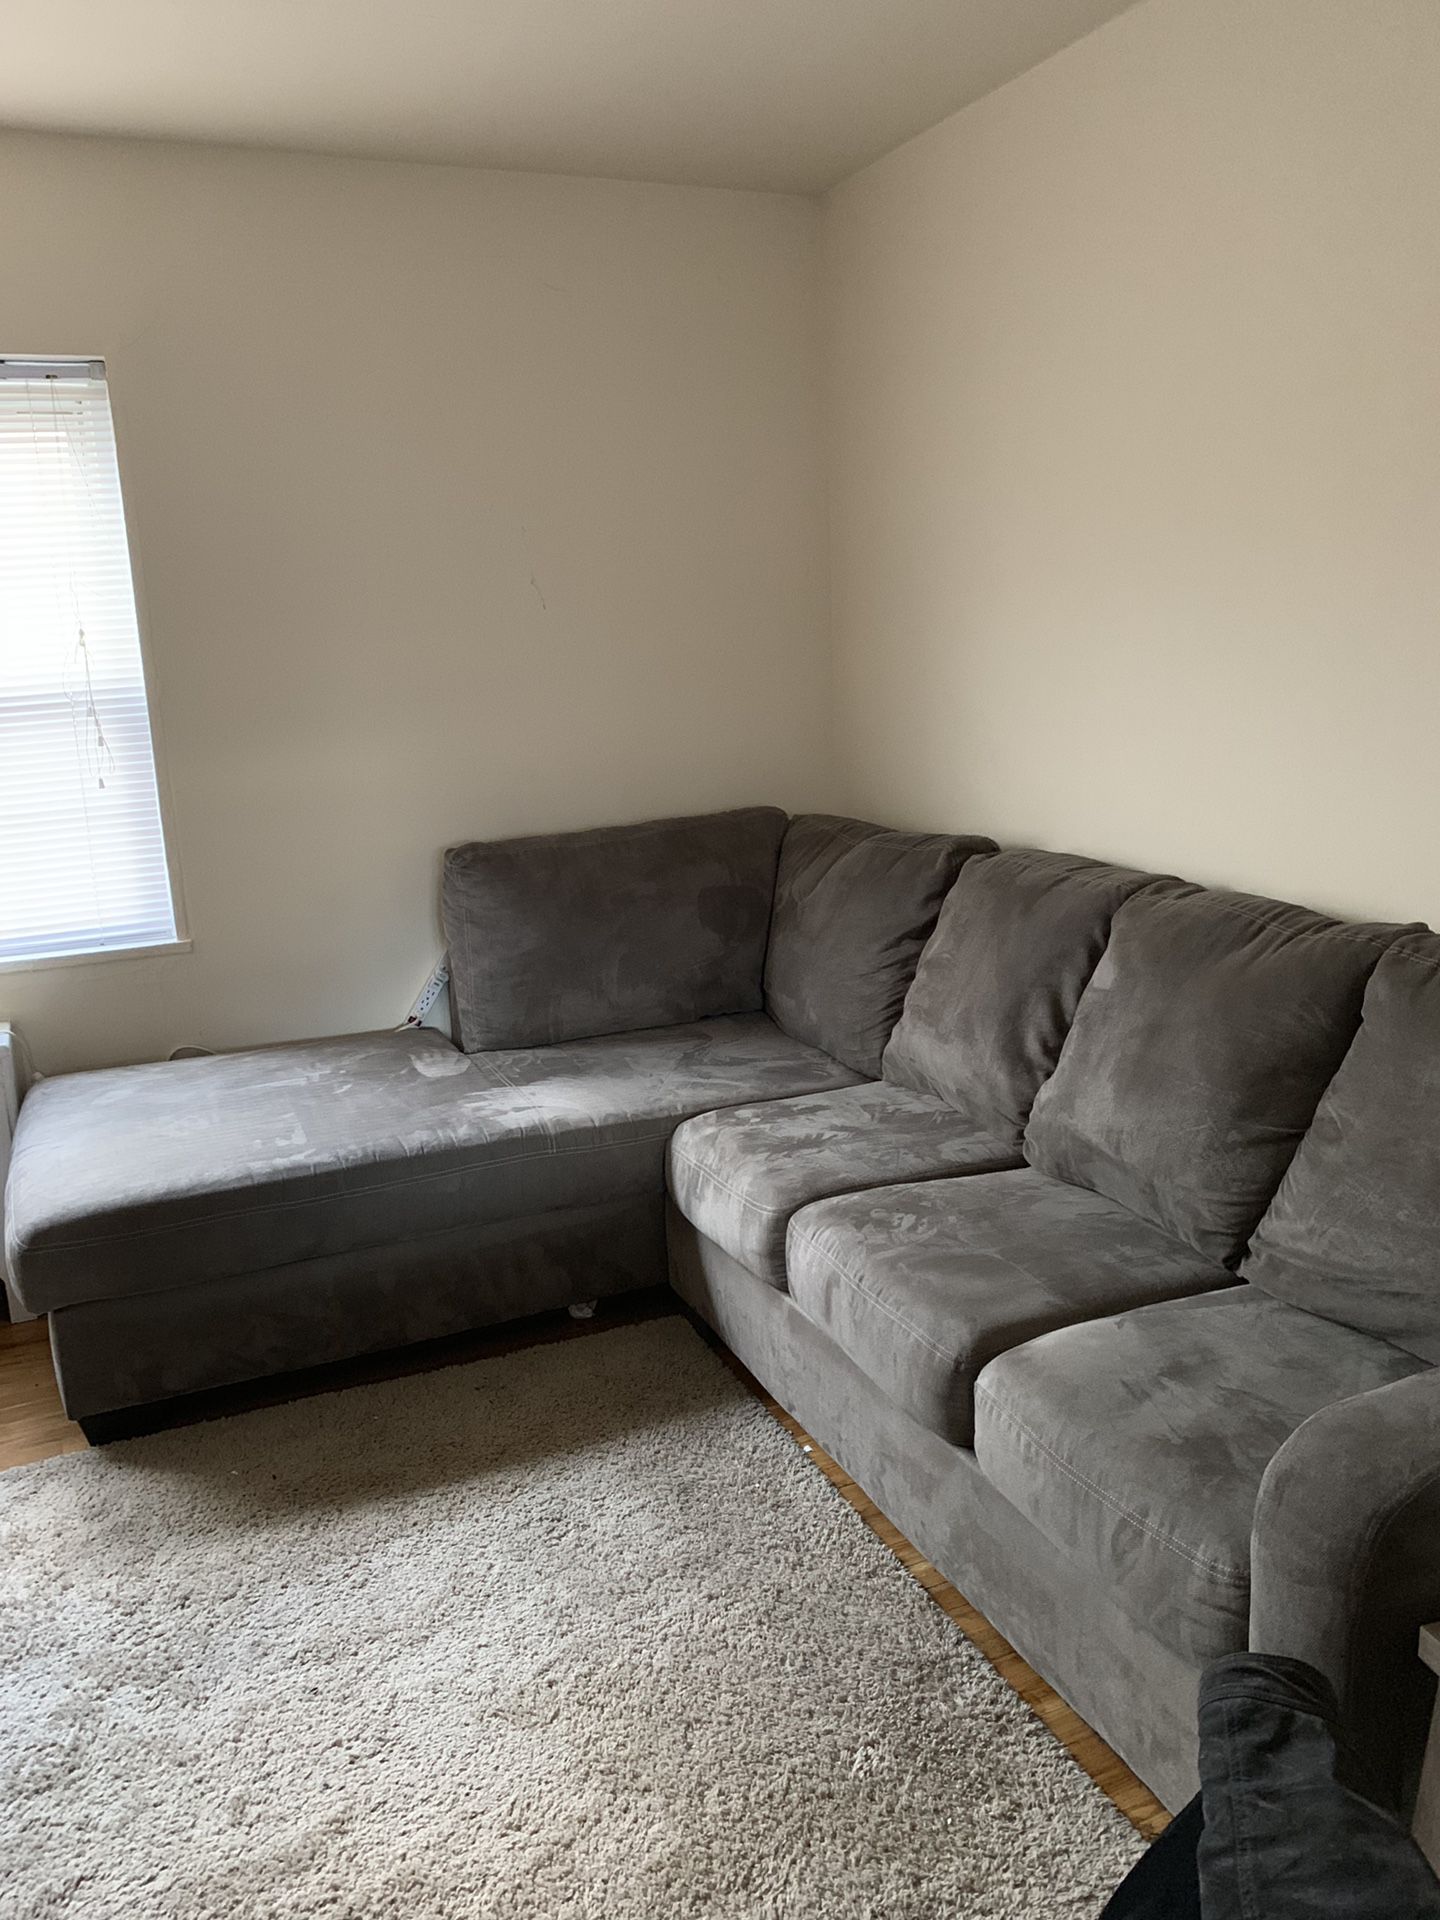 couch in very good condition